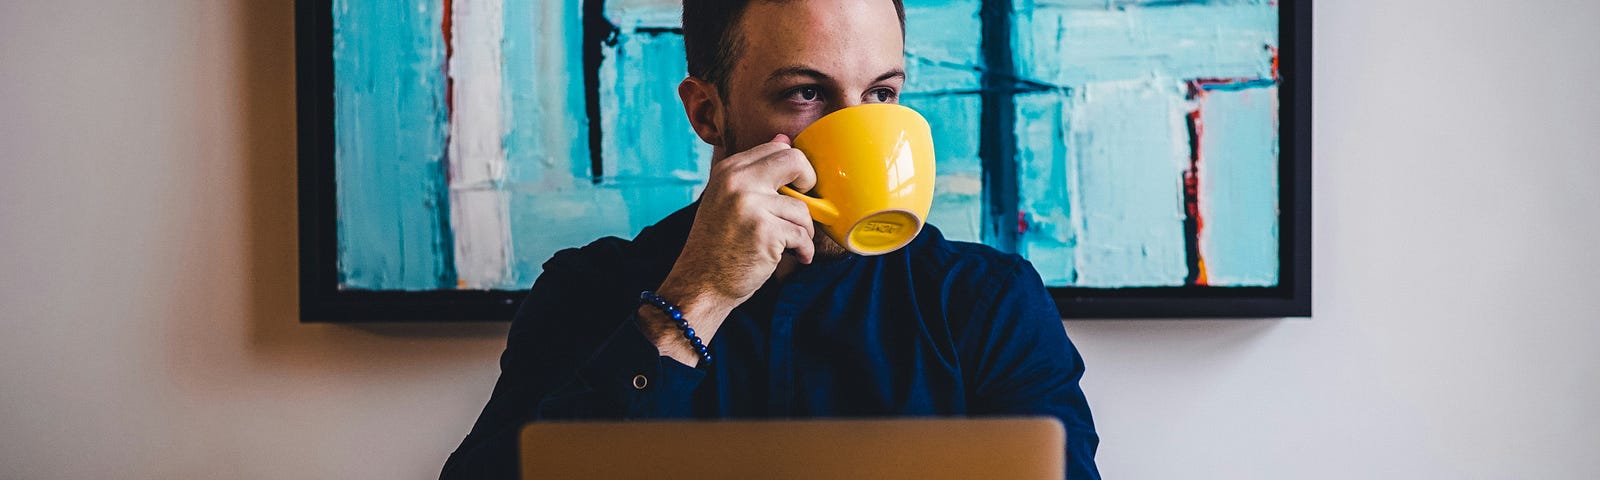 A man in his office drinking coffee from a yellow mug